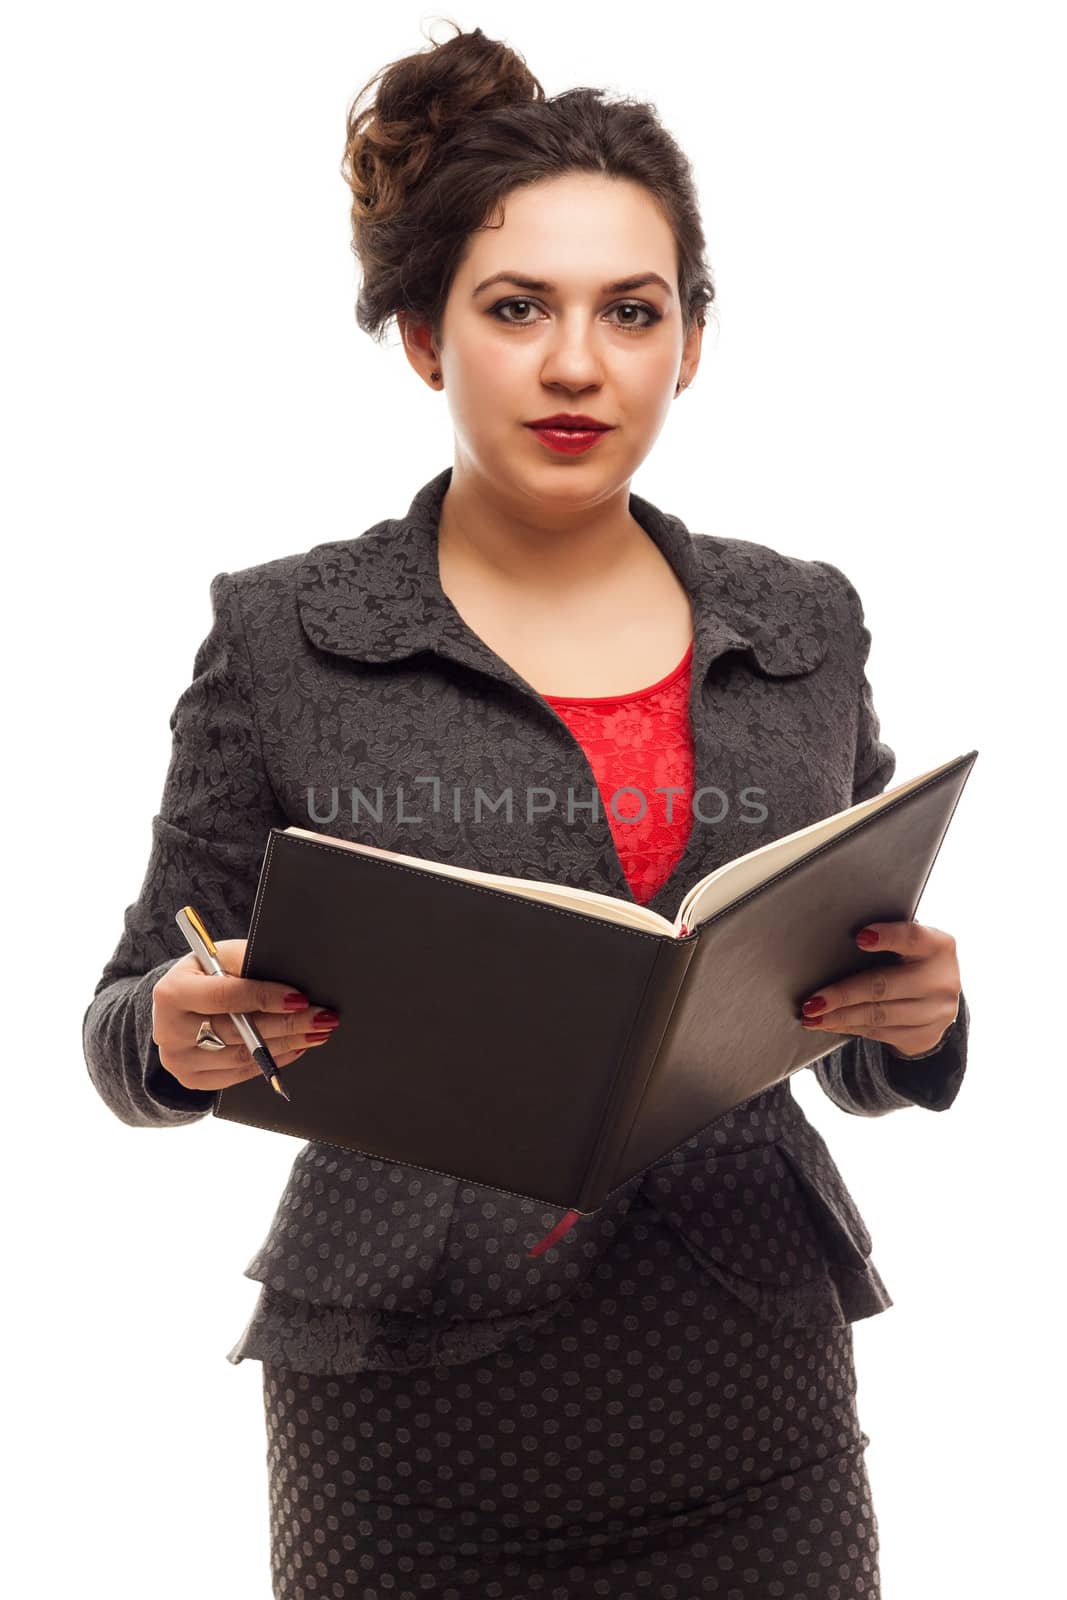 Confident business woman portrait  with notebook isolated over a white background